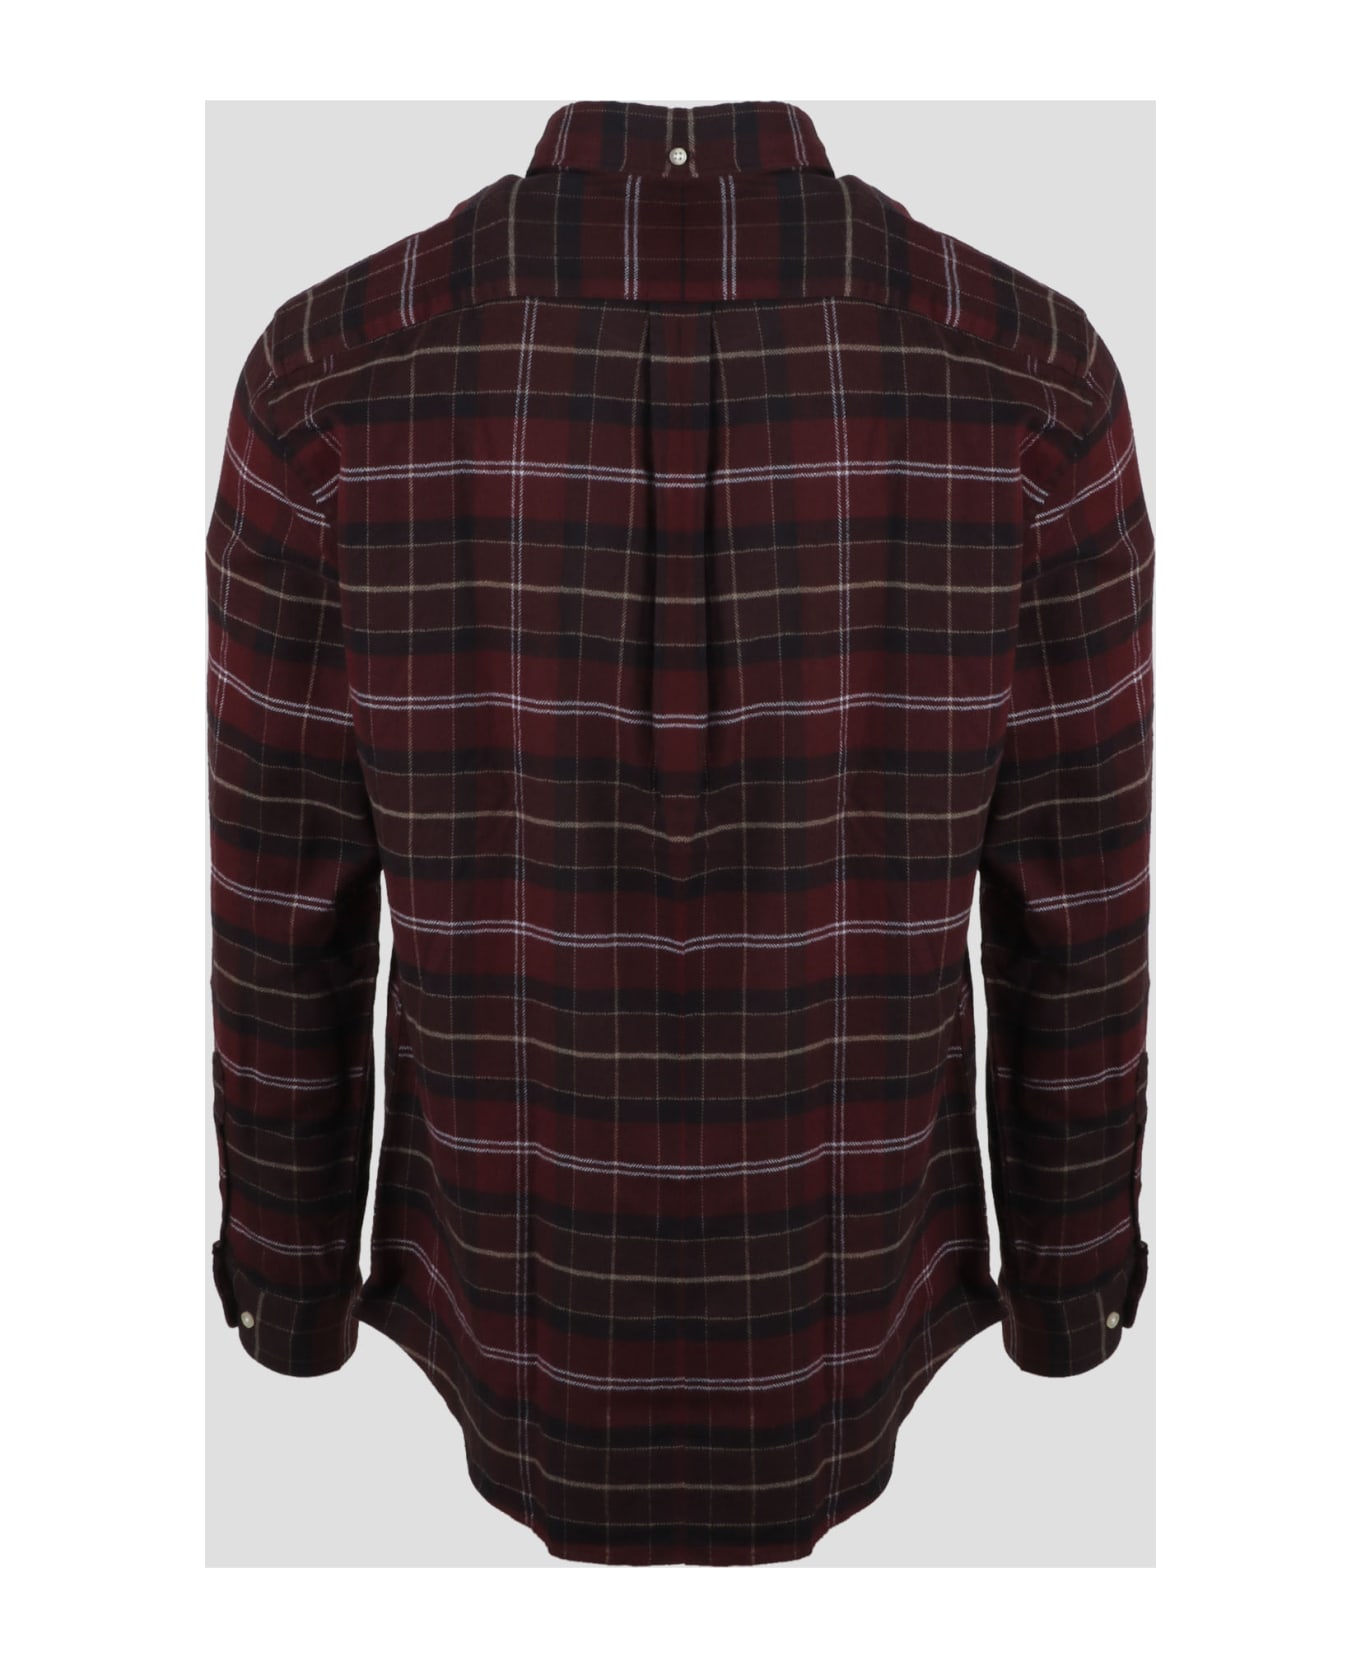 Barbour Kyeloch Shirt - Red